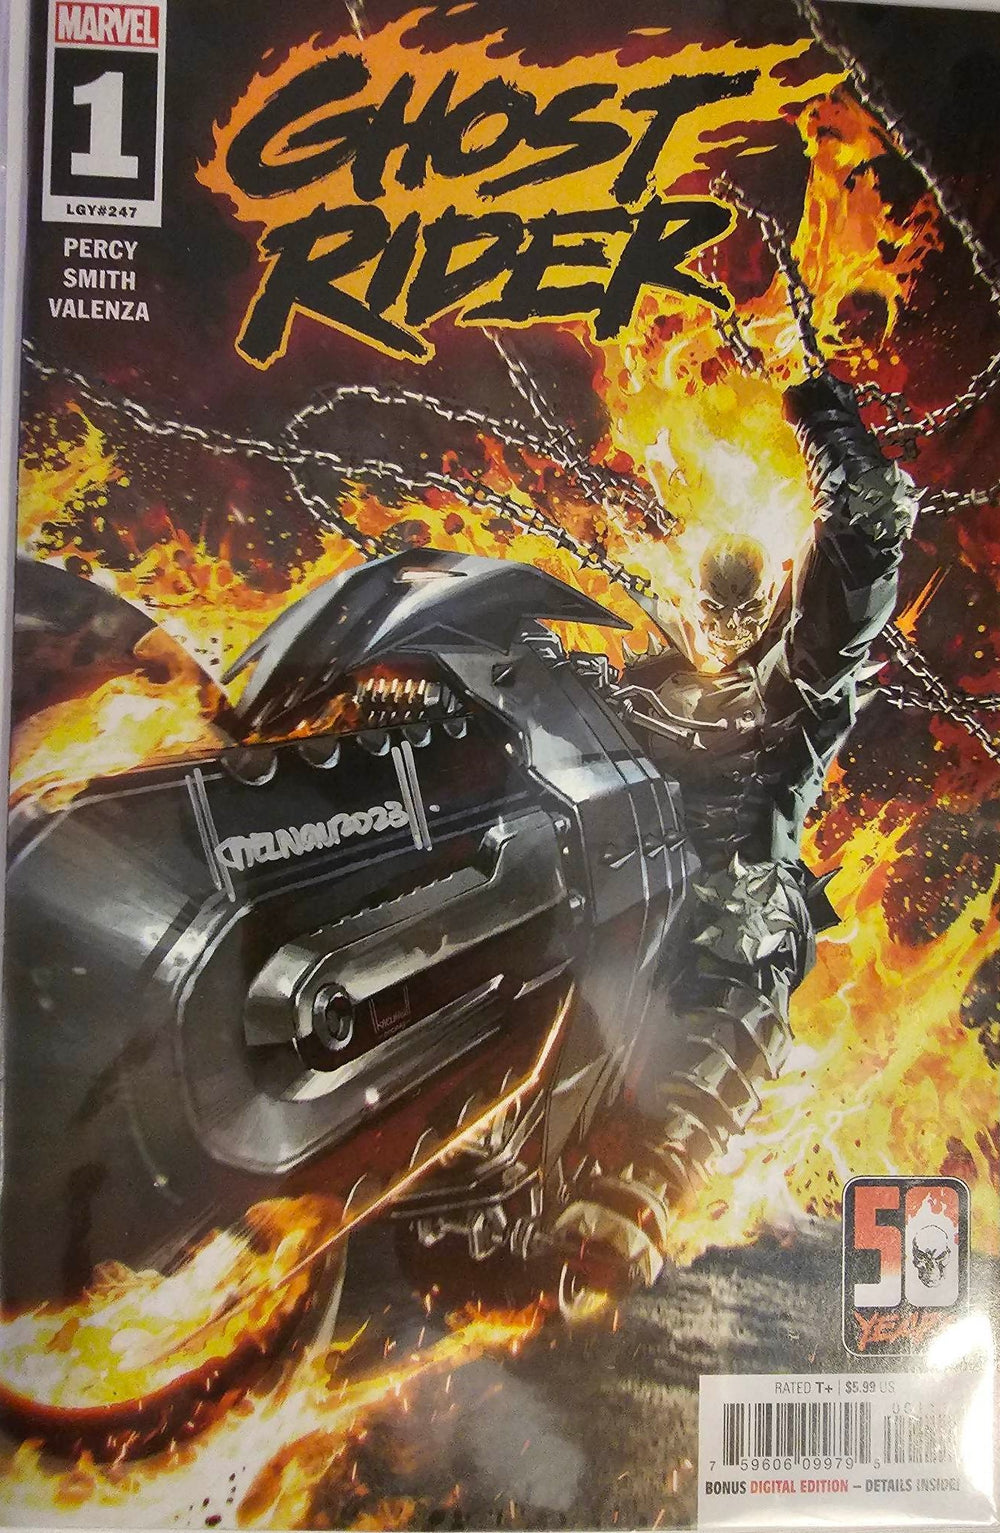 GHOST RIDER #1 Cover A (1st Print) Signed by KAEL NGU with COA! ***ONLY 1 COPY LEFT!***